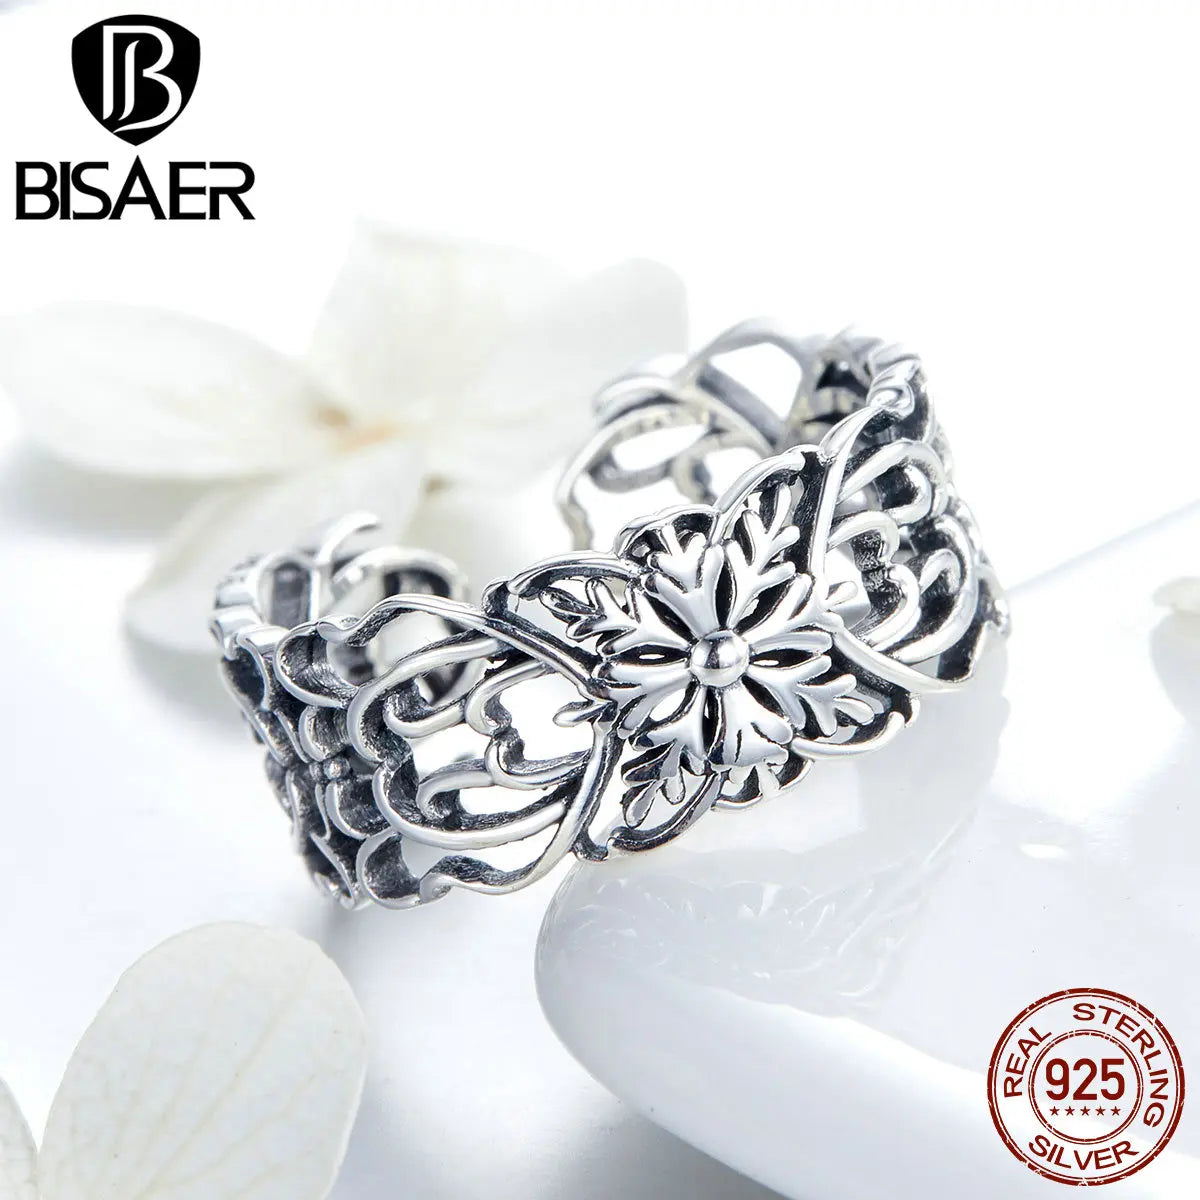 Dazzling Daisy Adjustable 925 Sterling Silver Ring